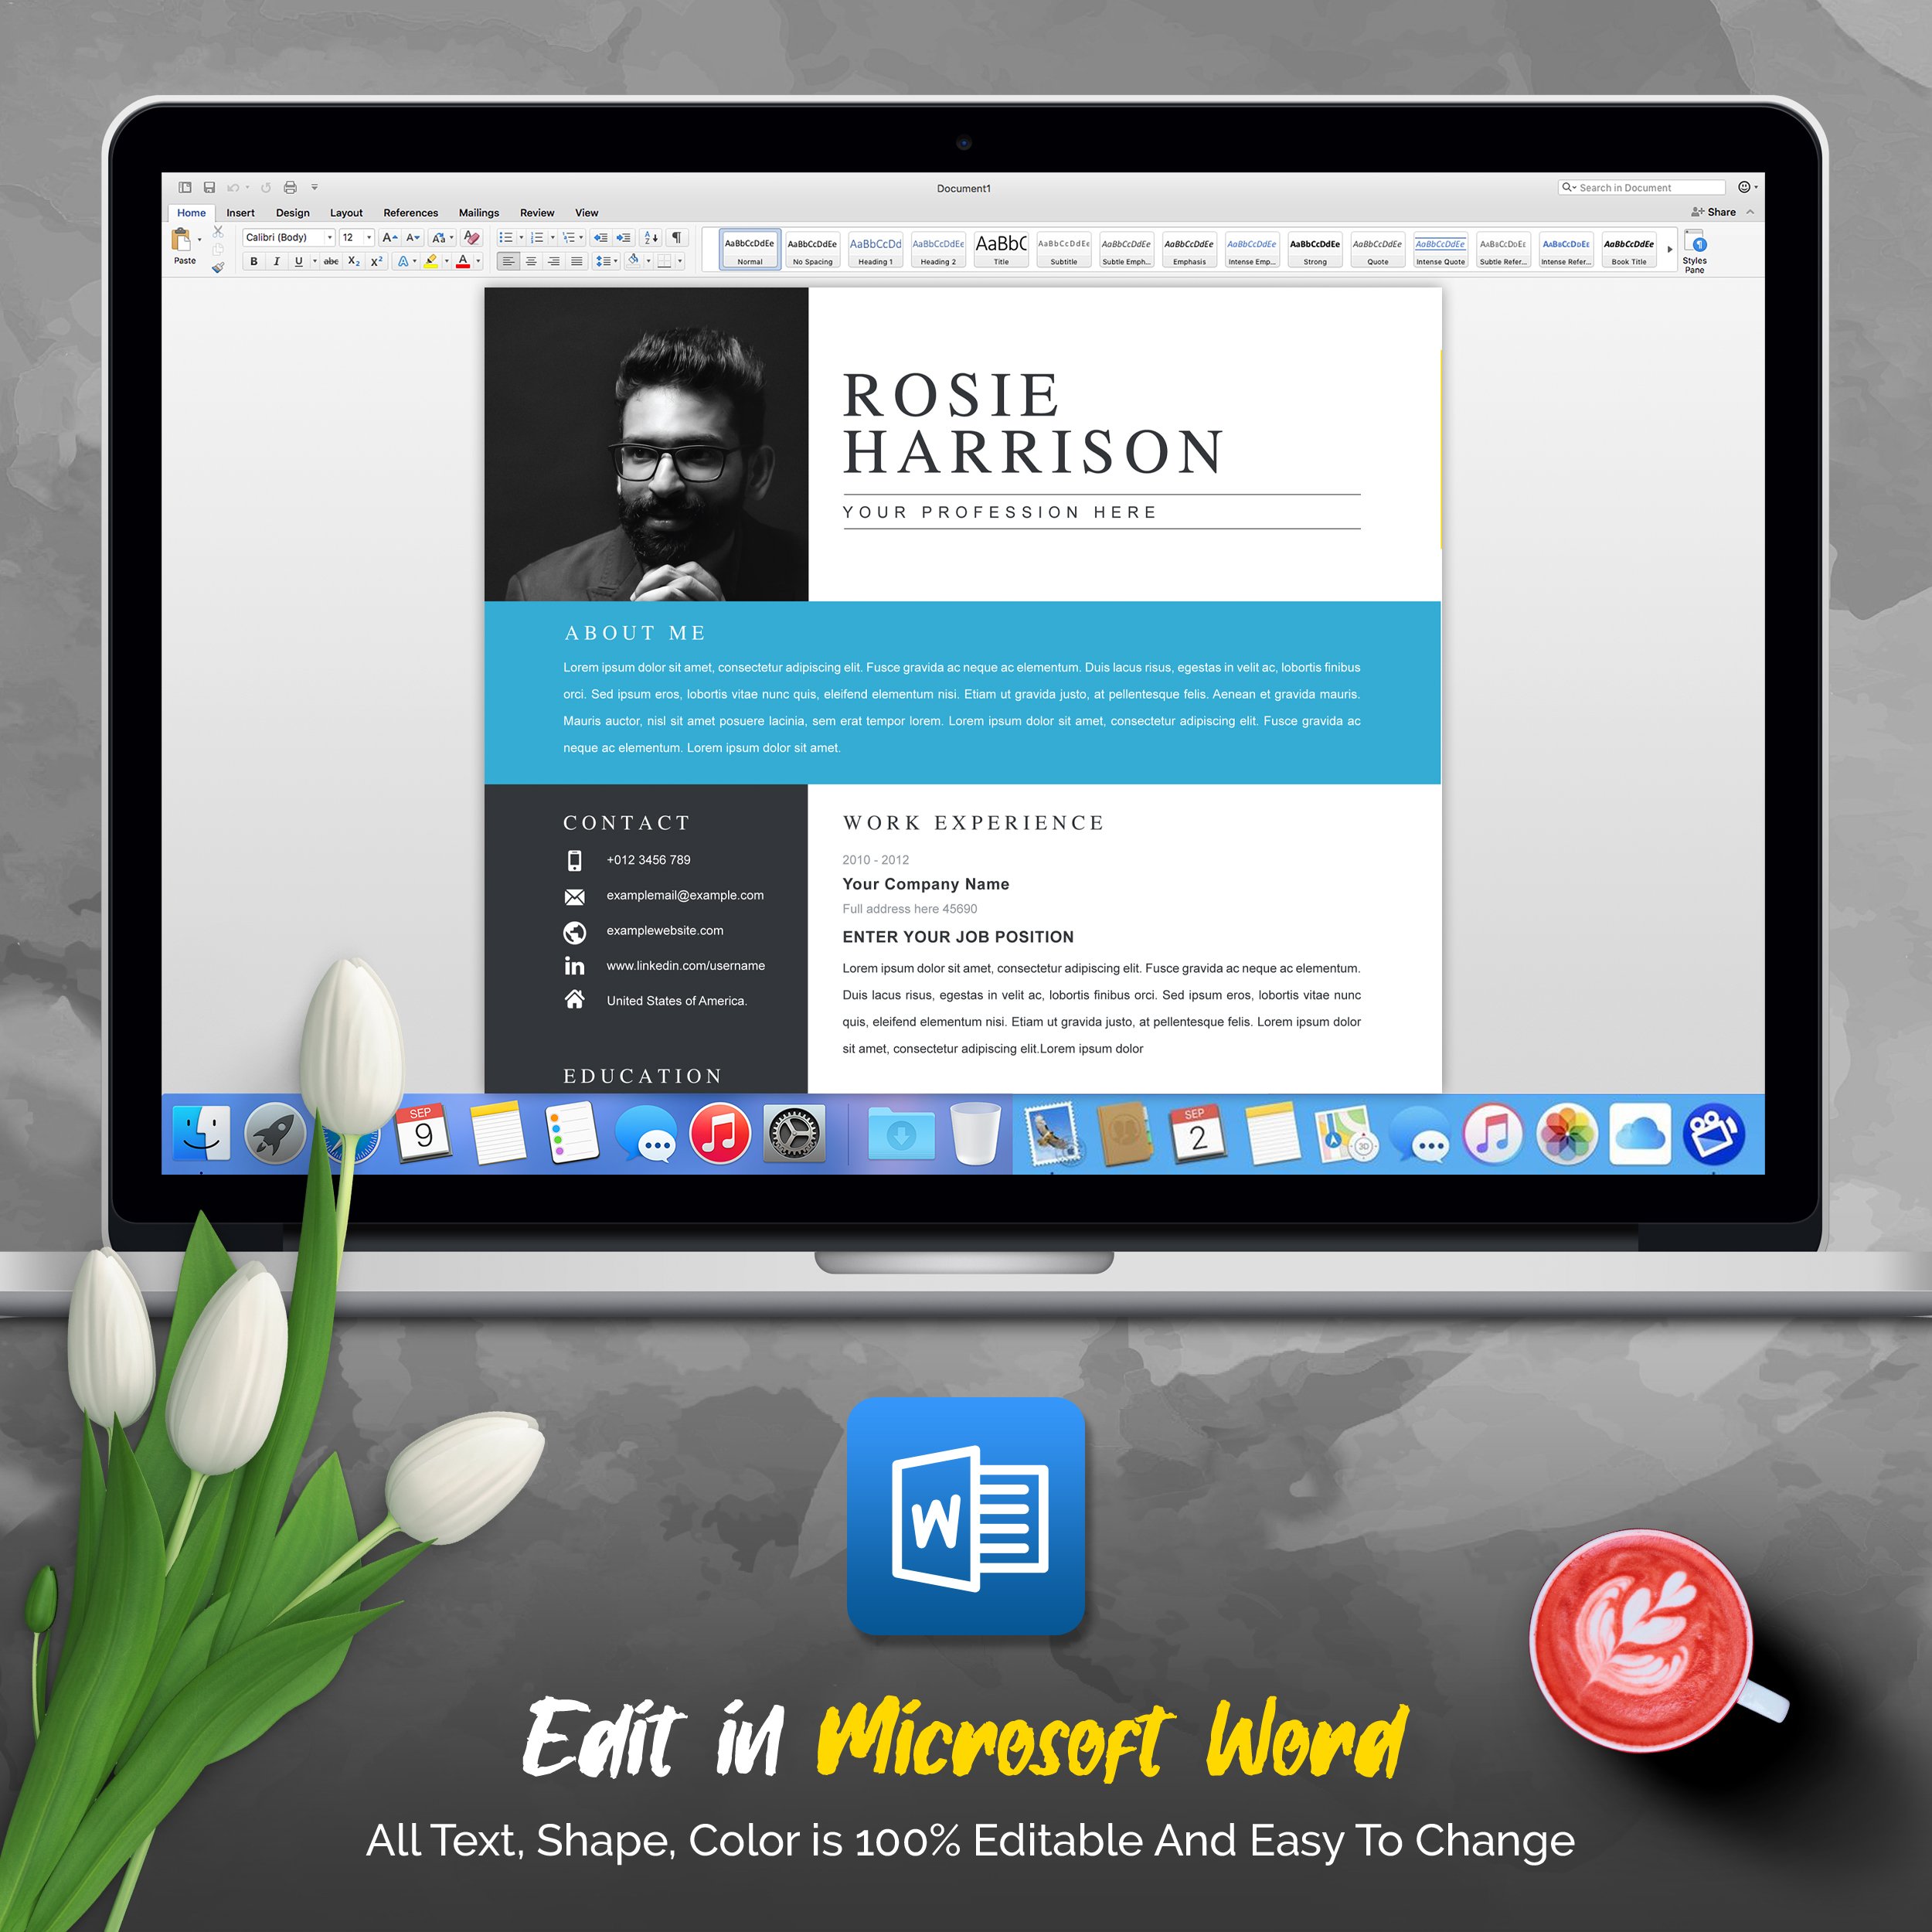 04 resume microsoft word pages professional ms word aple pages eps photoshop psd resume cv design template design by resume inventor 565